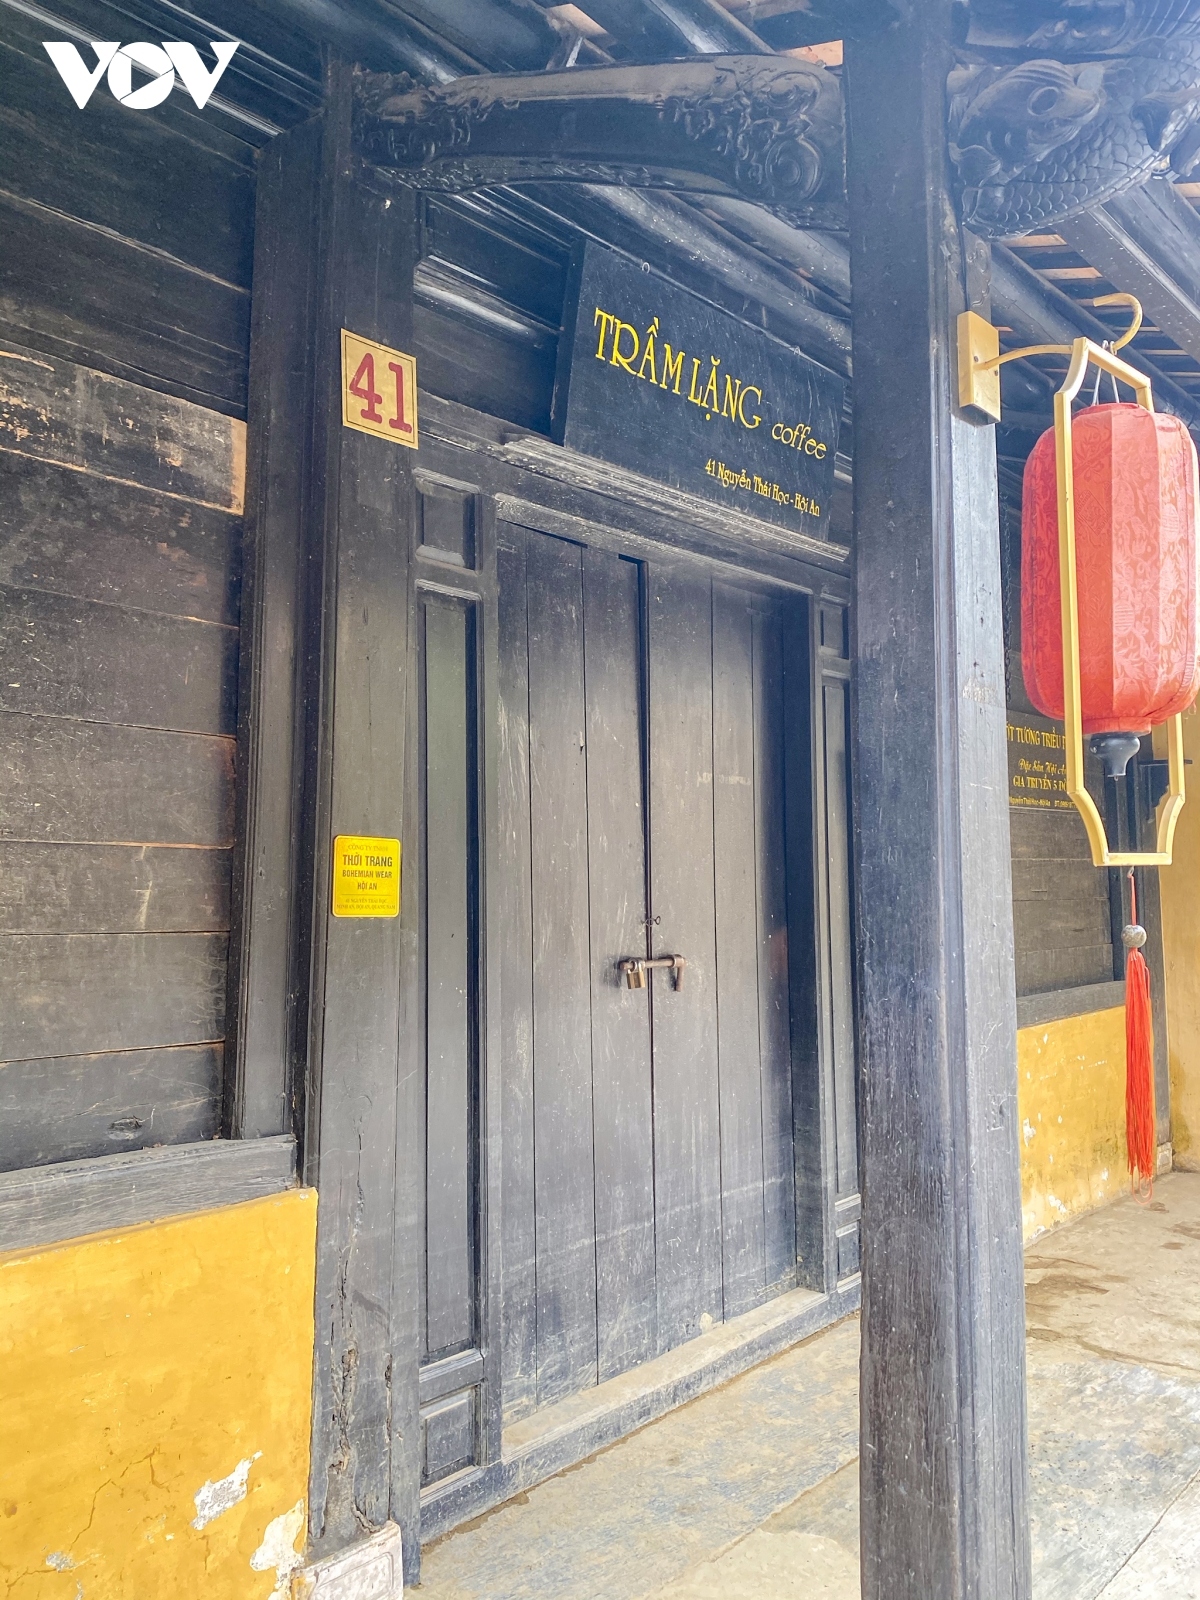 impact of covid-19 pandemic leaves hoi an quiet amid tourism season picture 11